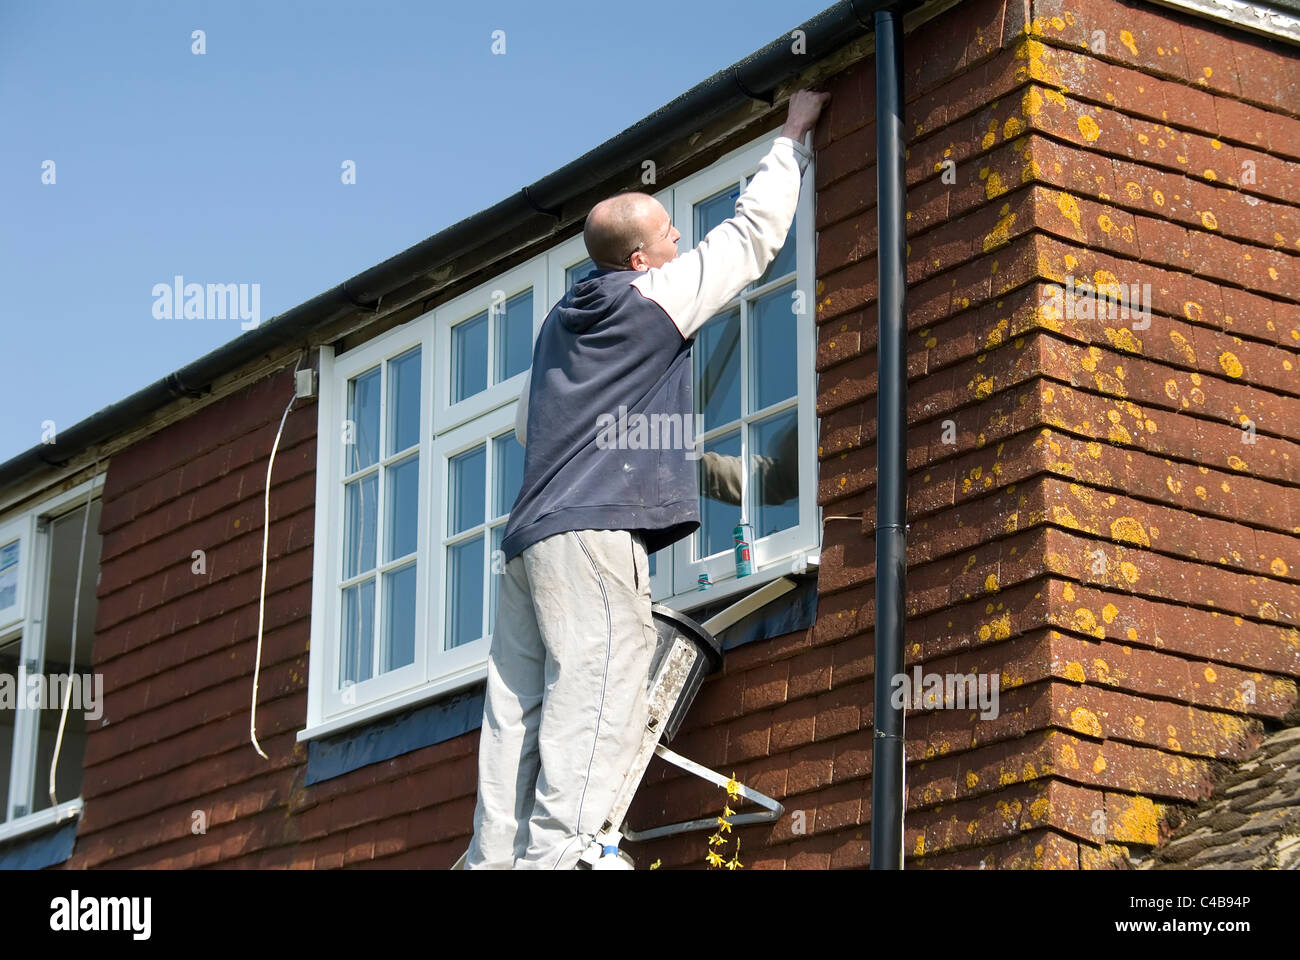 Installing A rated energy efficient replacement double glazed windows on an old house to improve energy efficiency Stock Photo